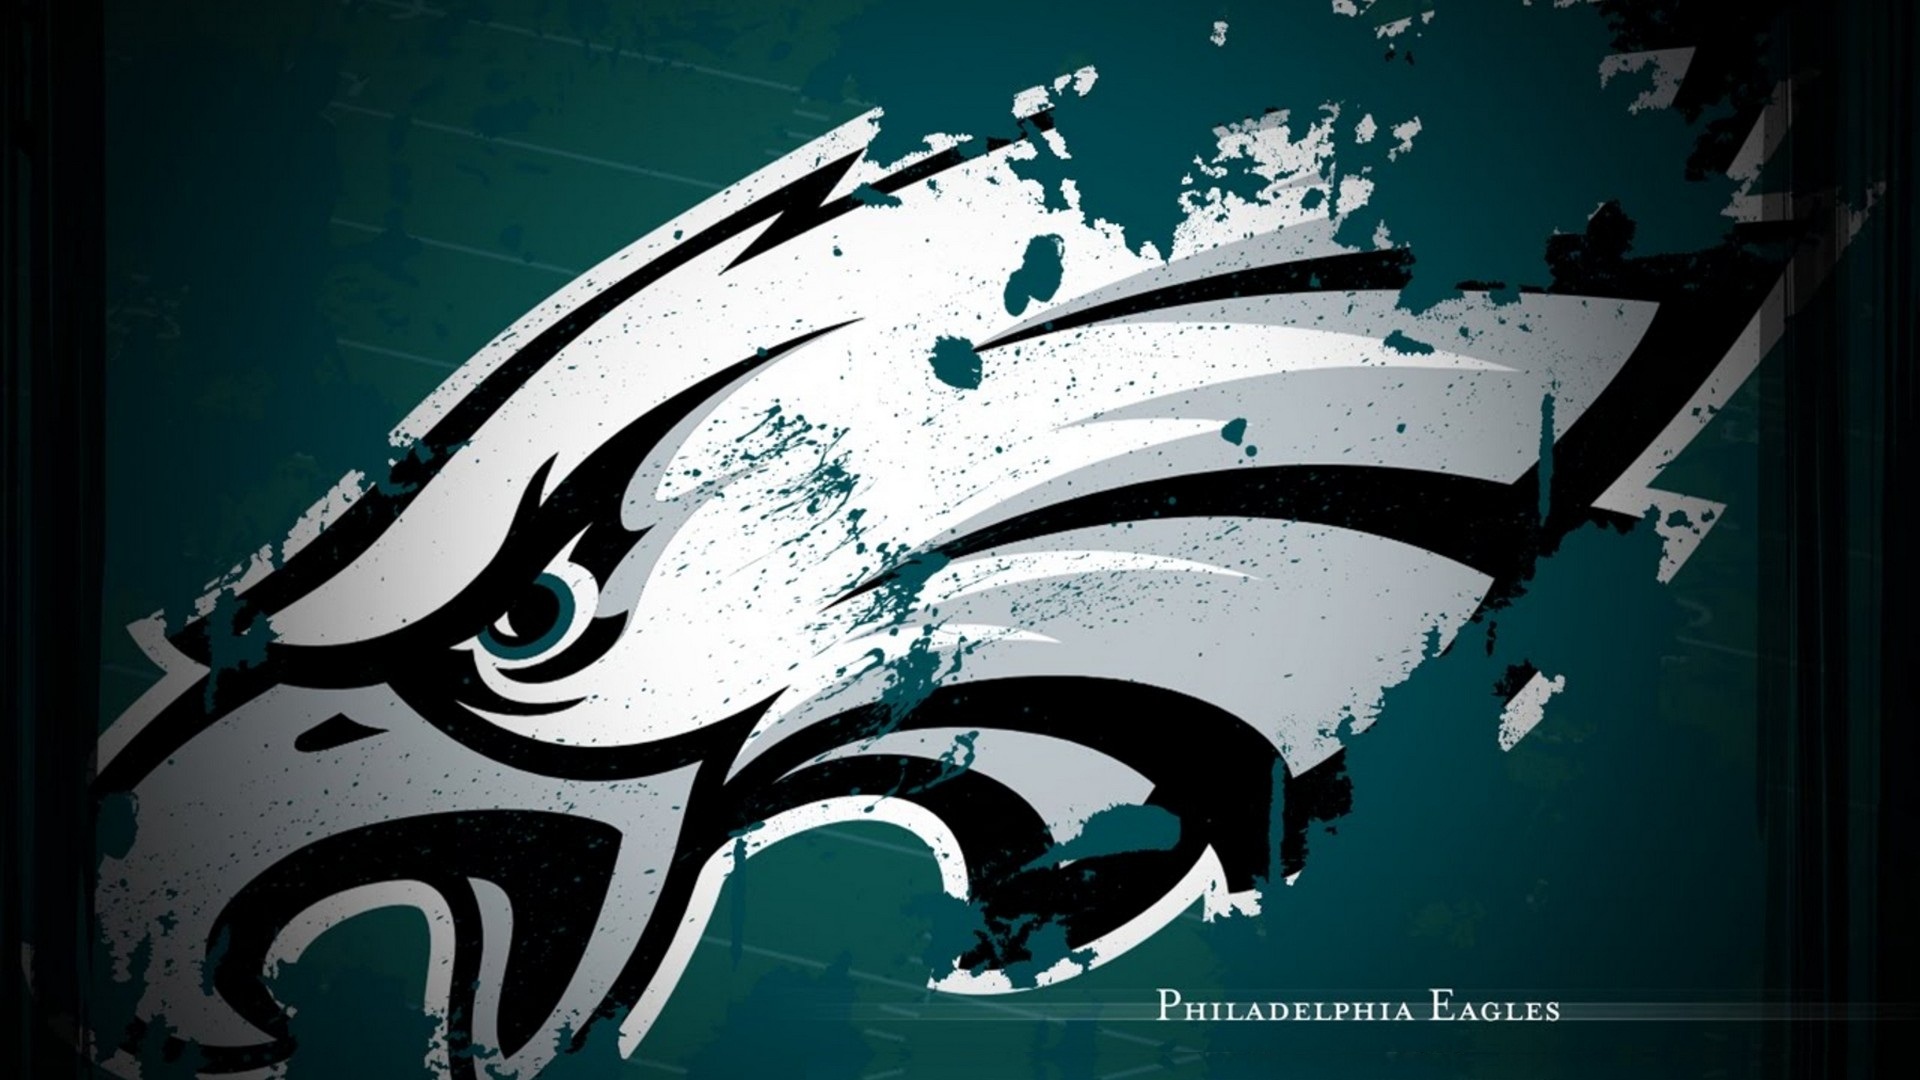 Philadelphia Eagles For PC Wallpaper With Resolution 1920X1080 pixel. You can make this wallpaper for your Mac or Windows Desktop Background, iPhone, Android or Tablet and another Smartphone device for free